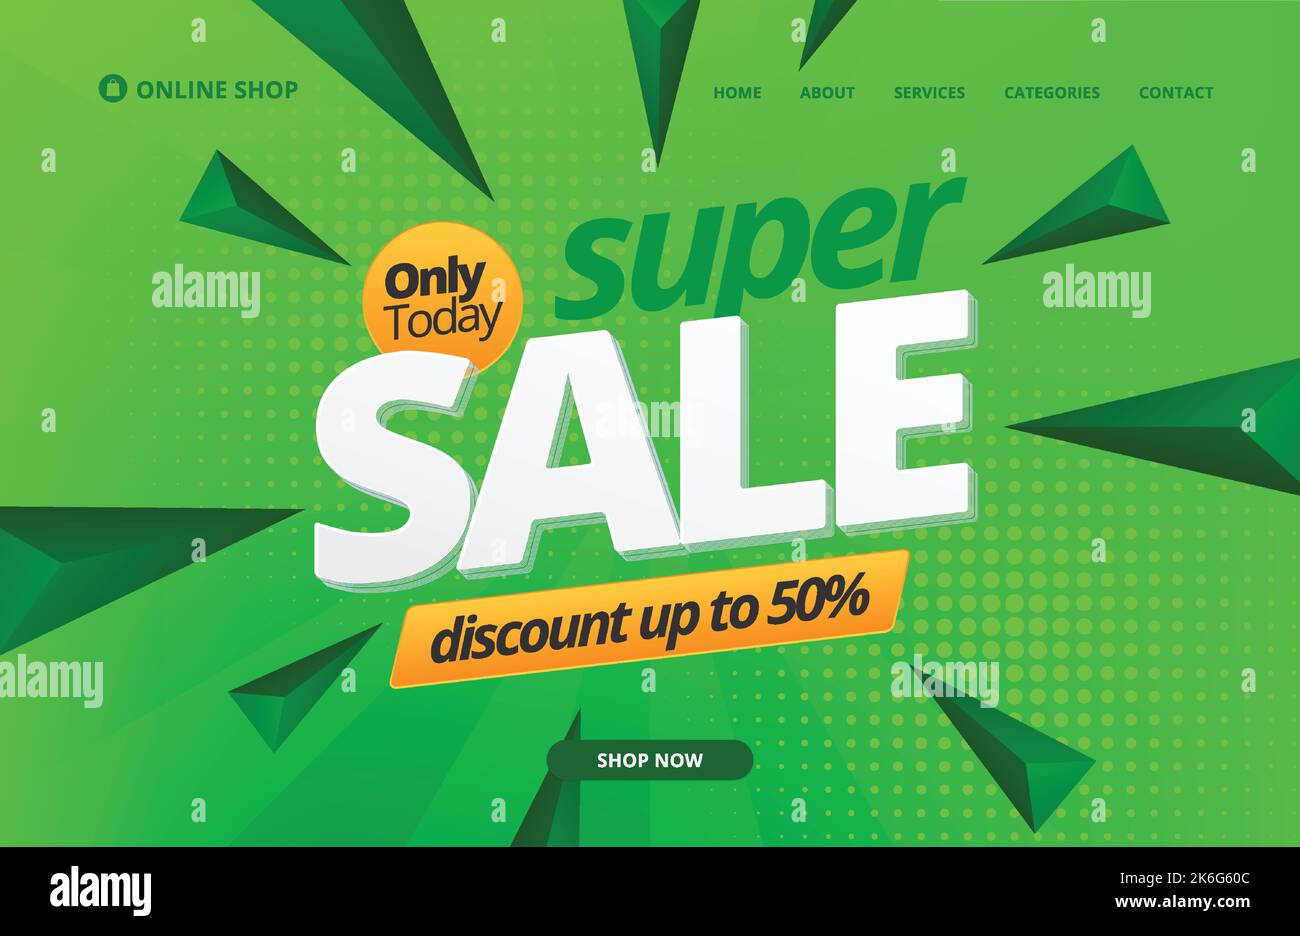 Super Sale 50% Off. Shopping day Poster or banner. Online sale banner template design for social media and website. Green Theme Website Landing Page. Stock Vector